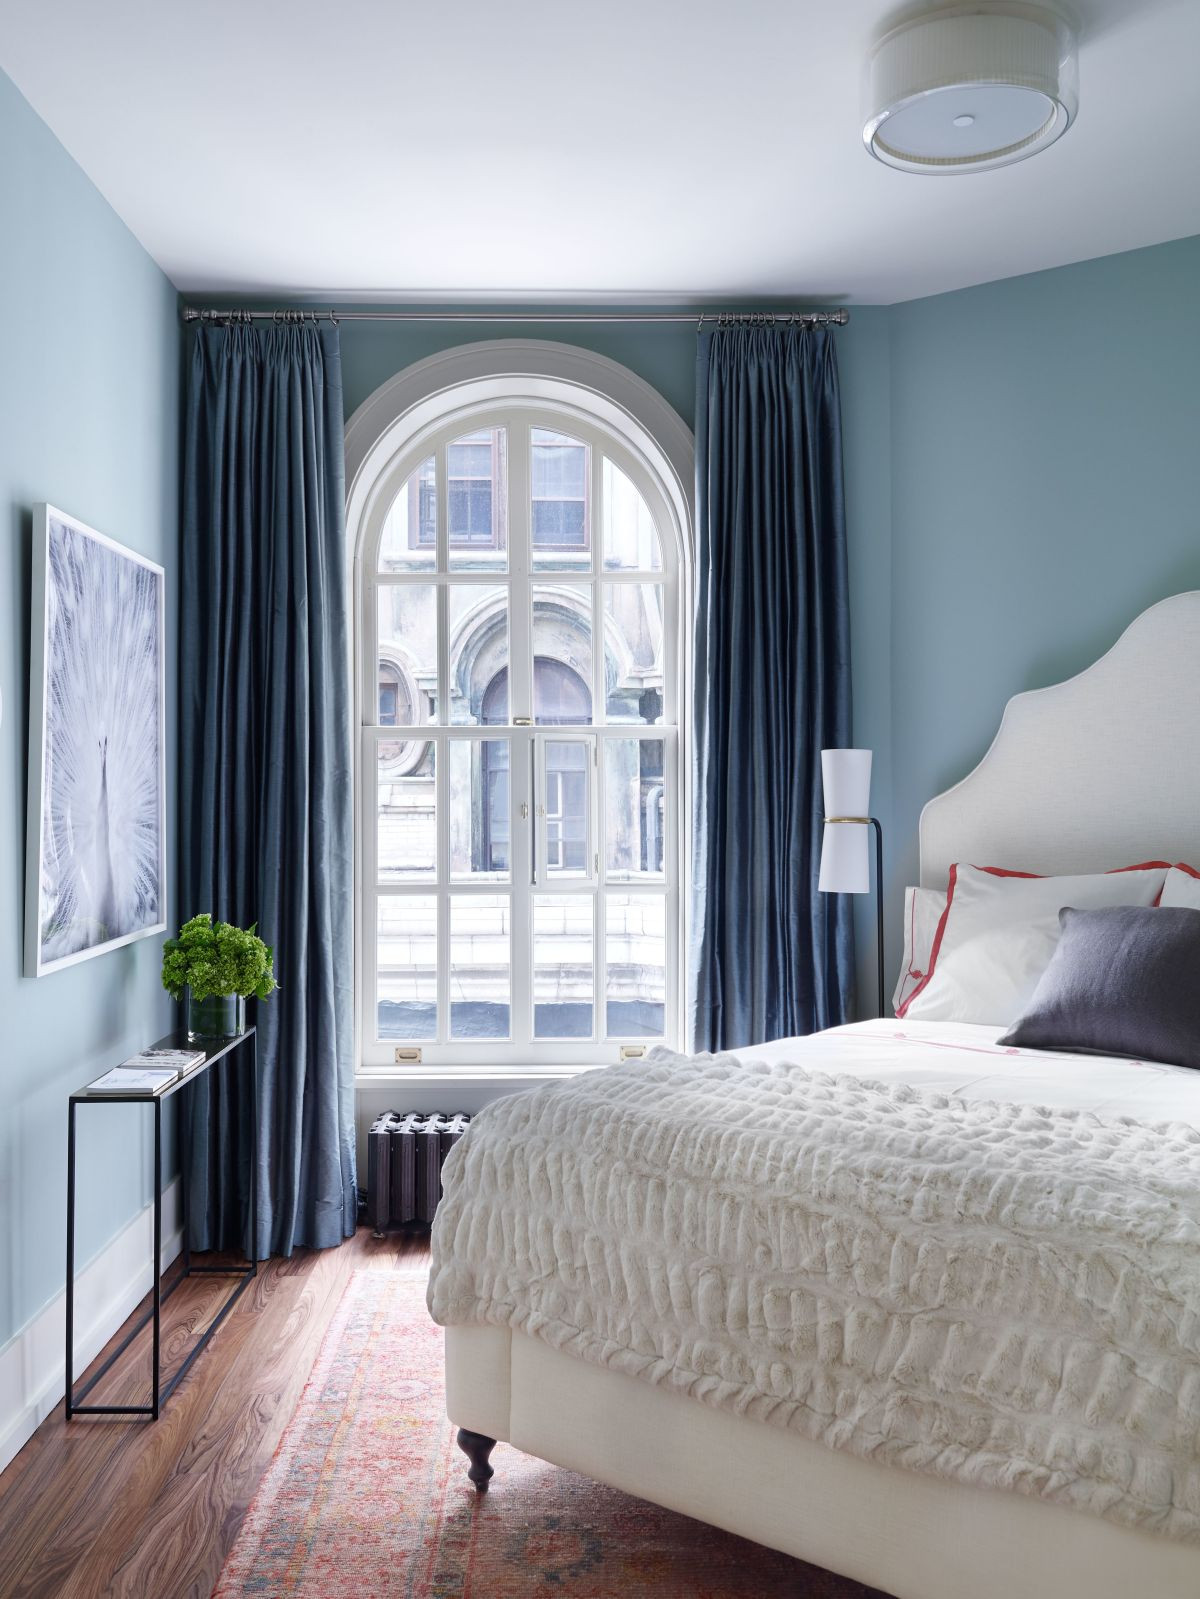 Blue Paint Colors For Bedroom
 The Four Best Paint Colors For Bedrooms